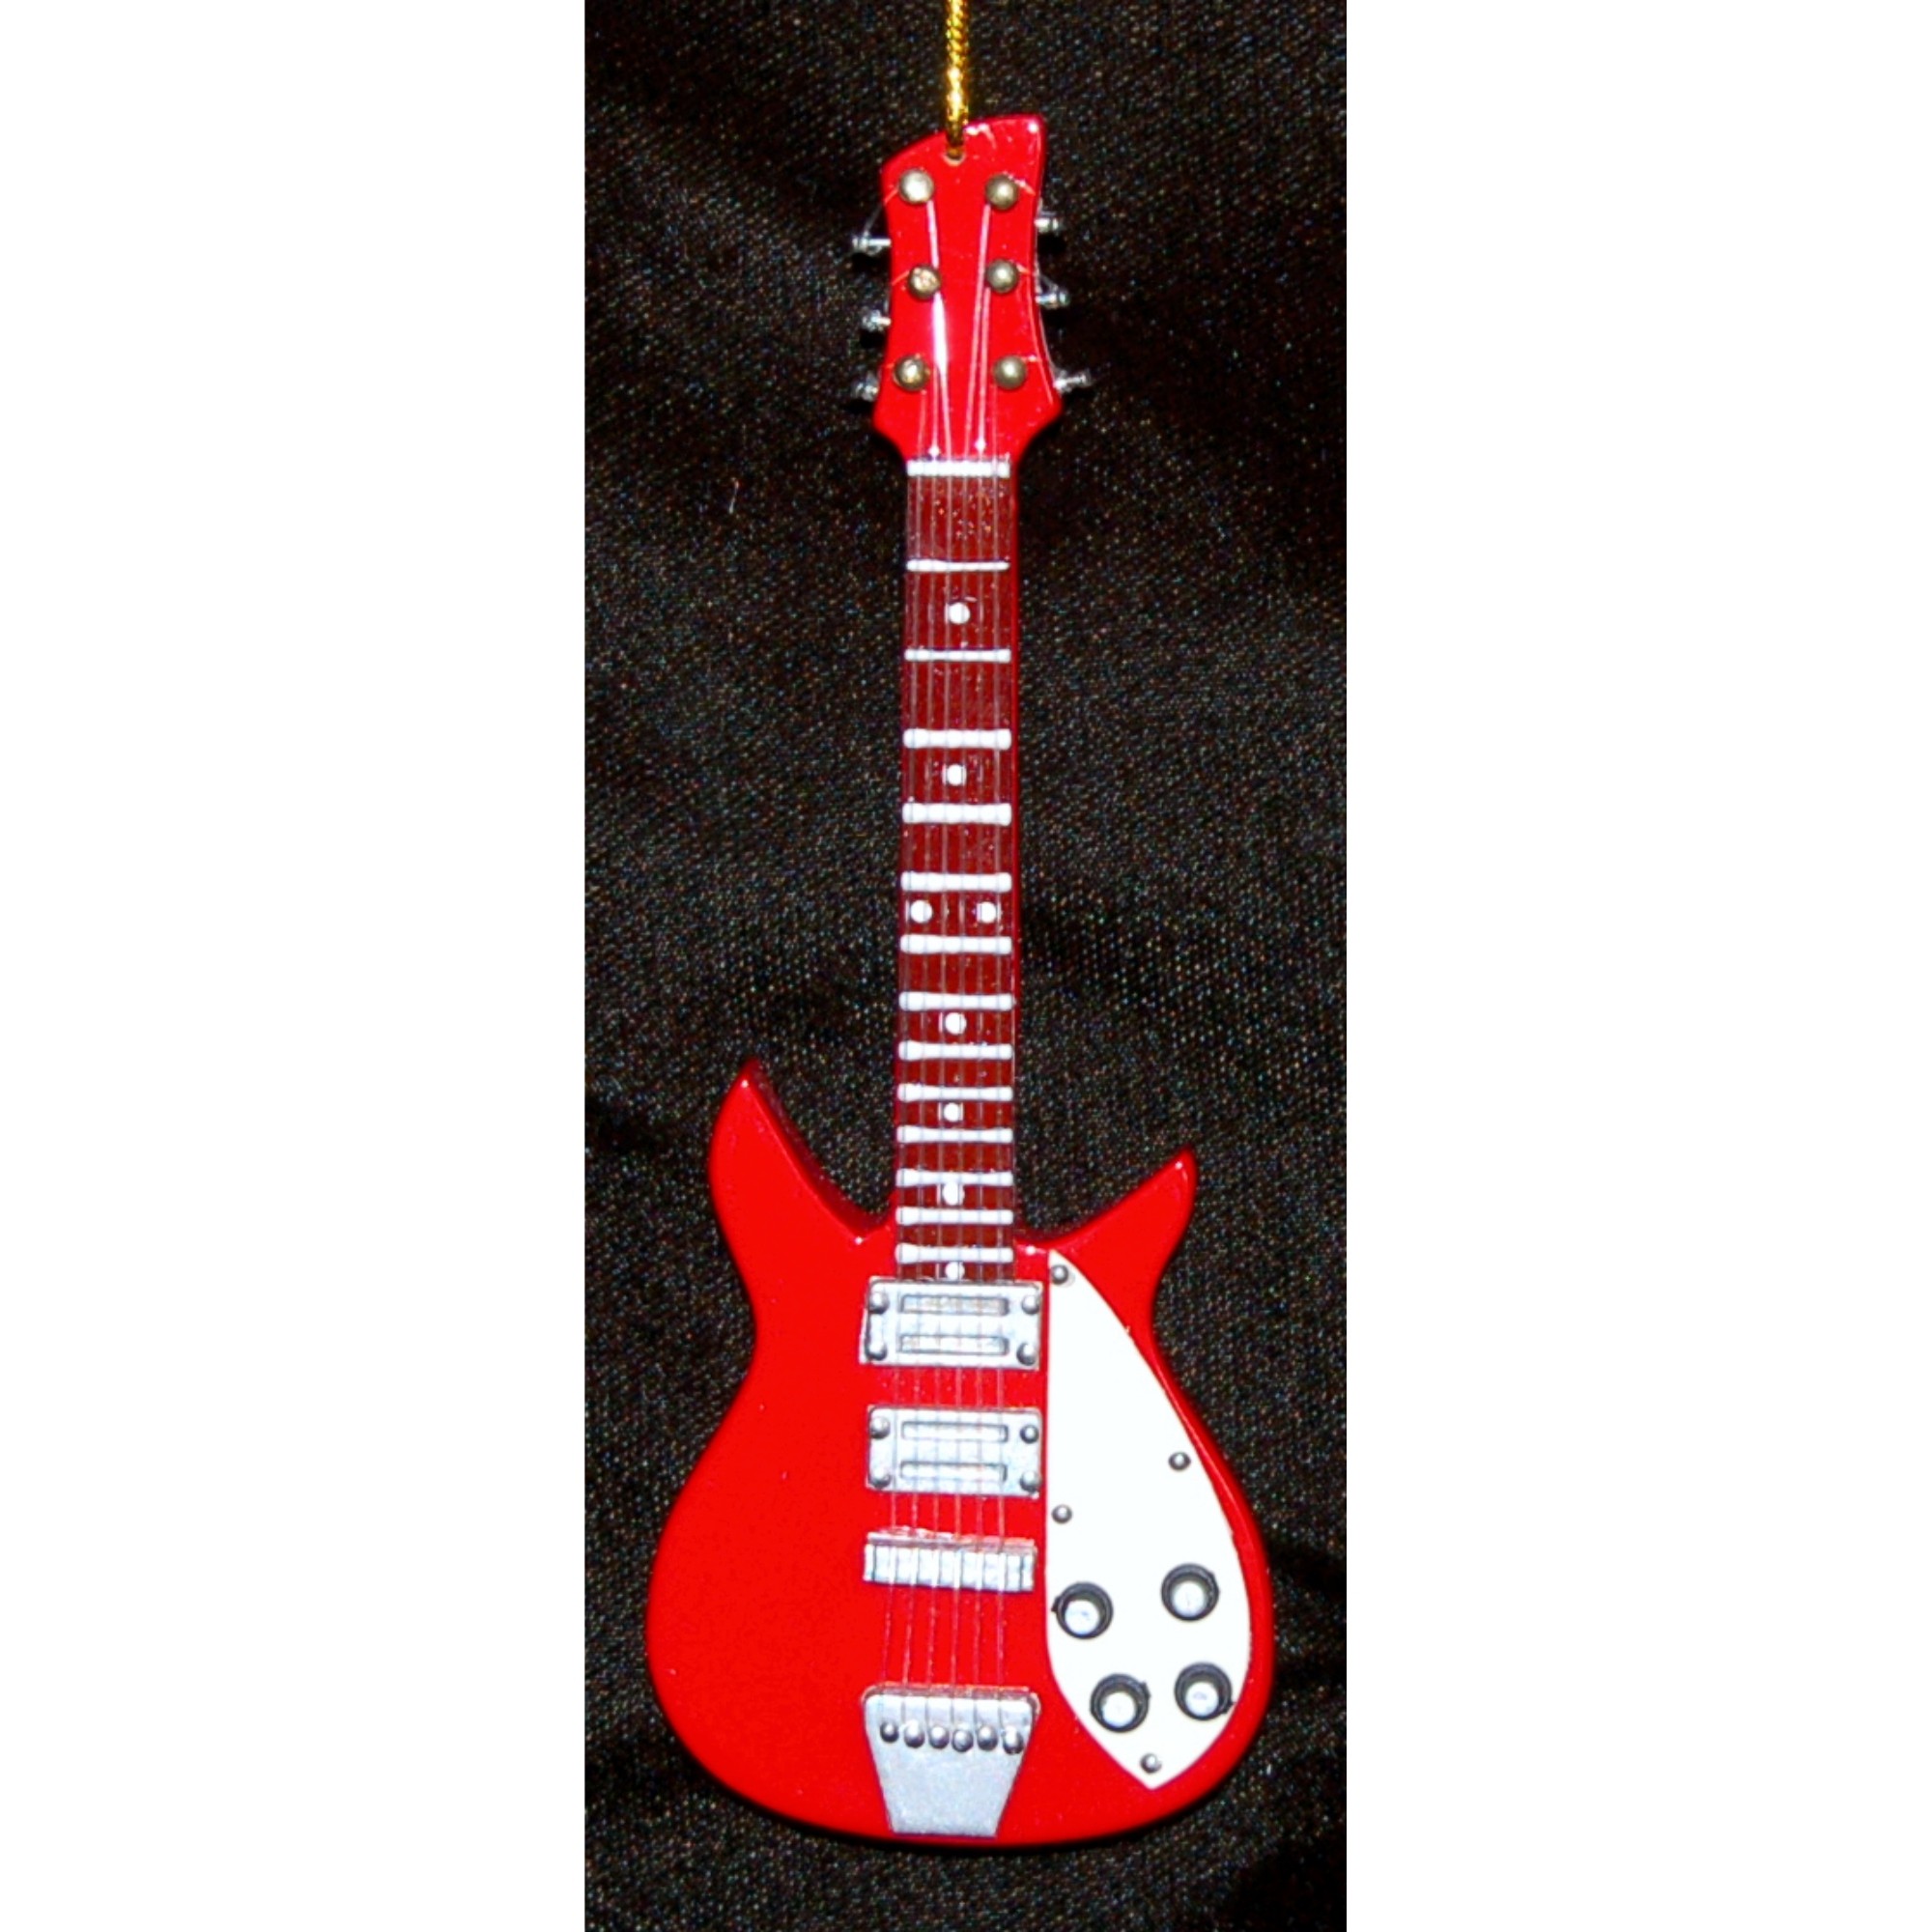 White Pick Guard Red Electric Guitar Christmas Ornament Personalized by RussellRhodes.com